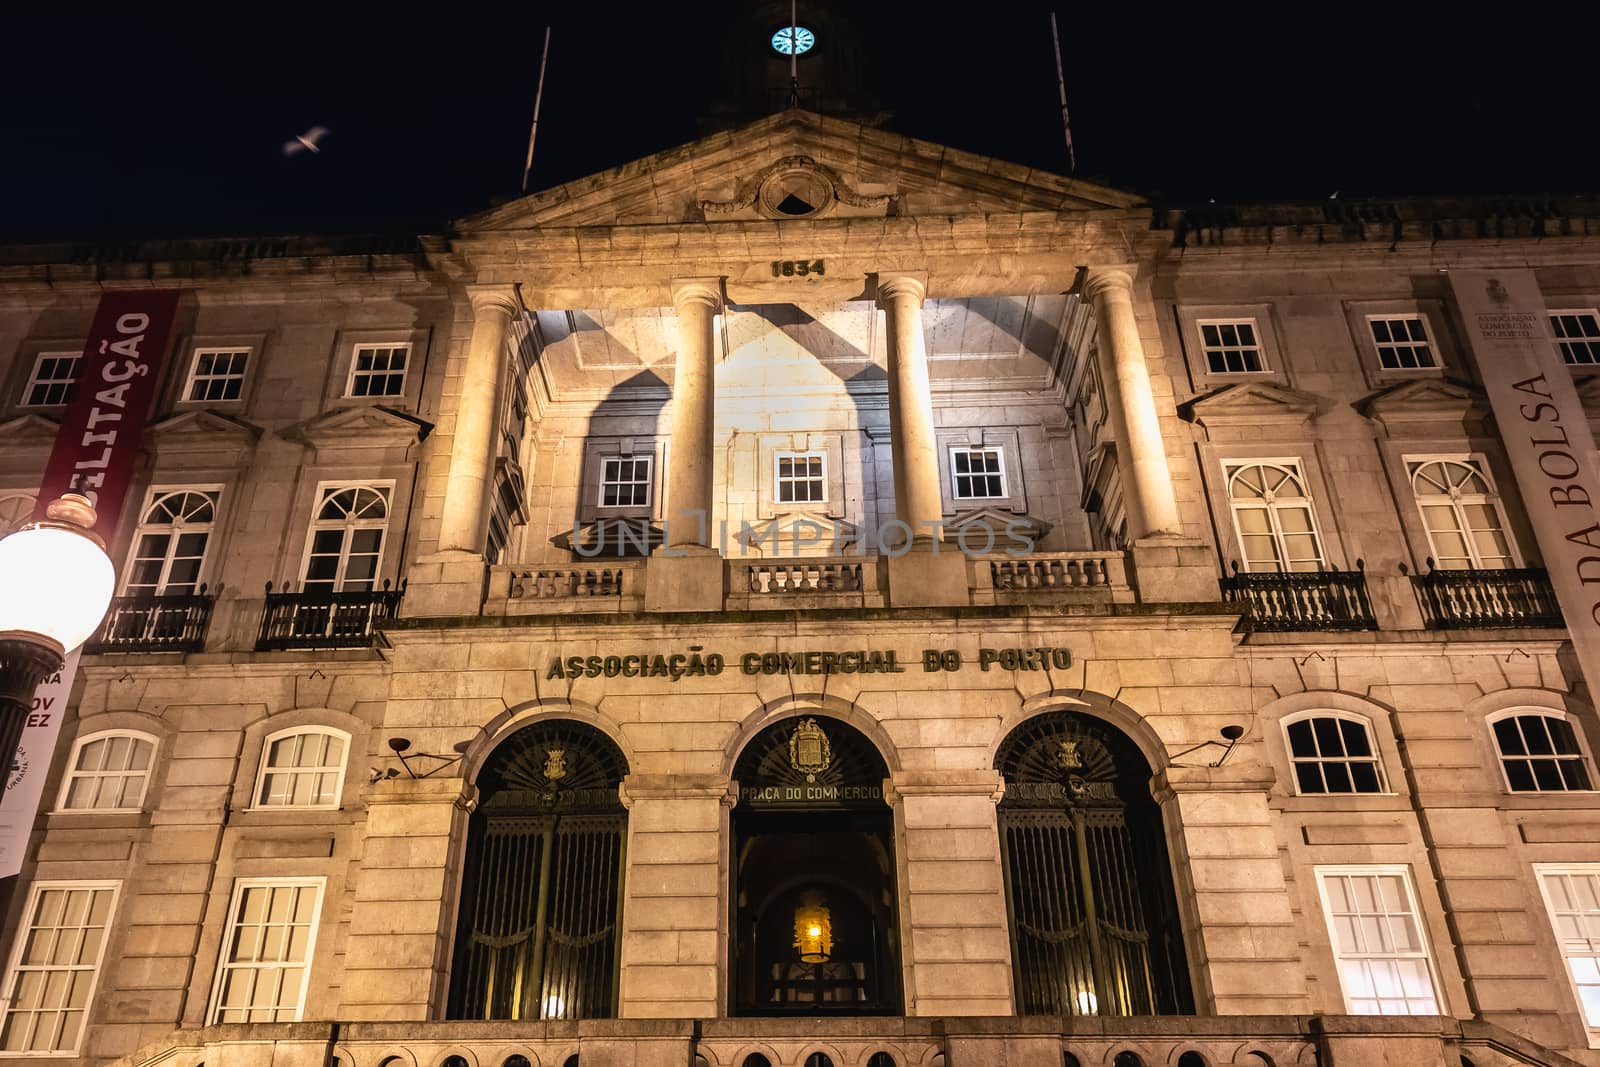 Architecture detail of Porto commercial association at night by AtlanticEUROSTOXX